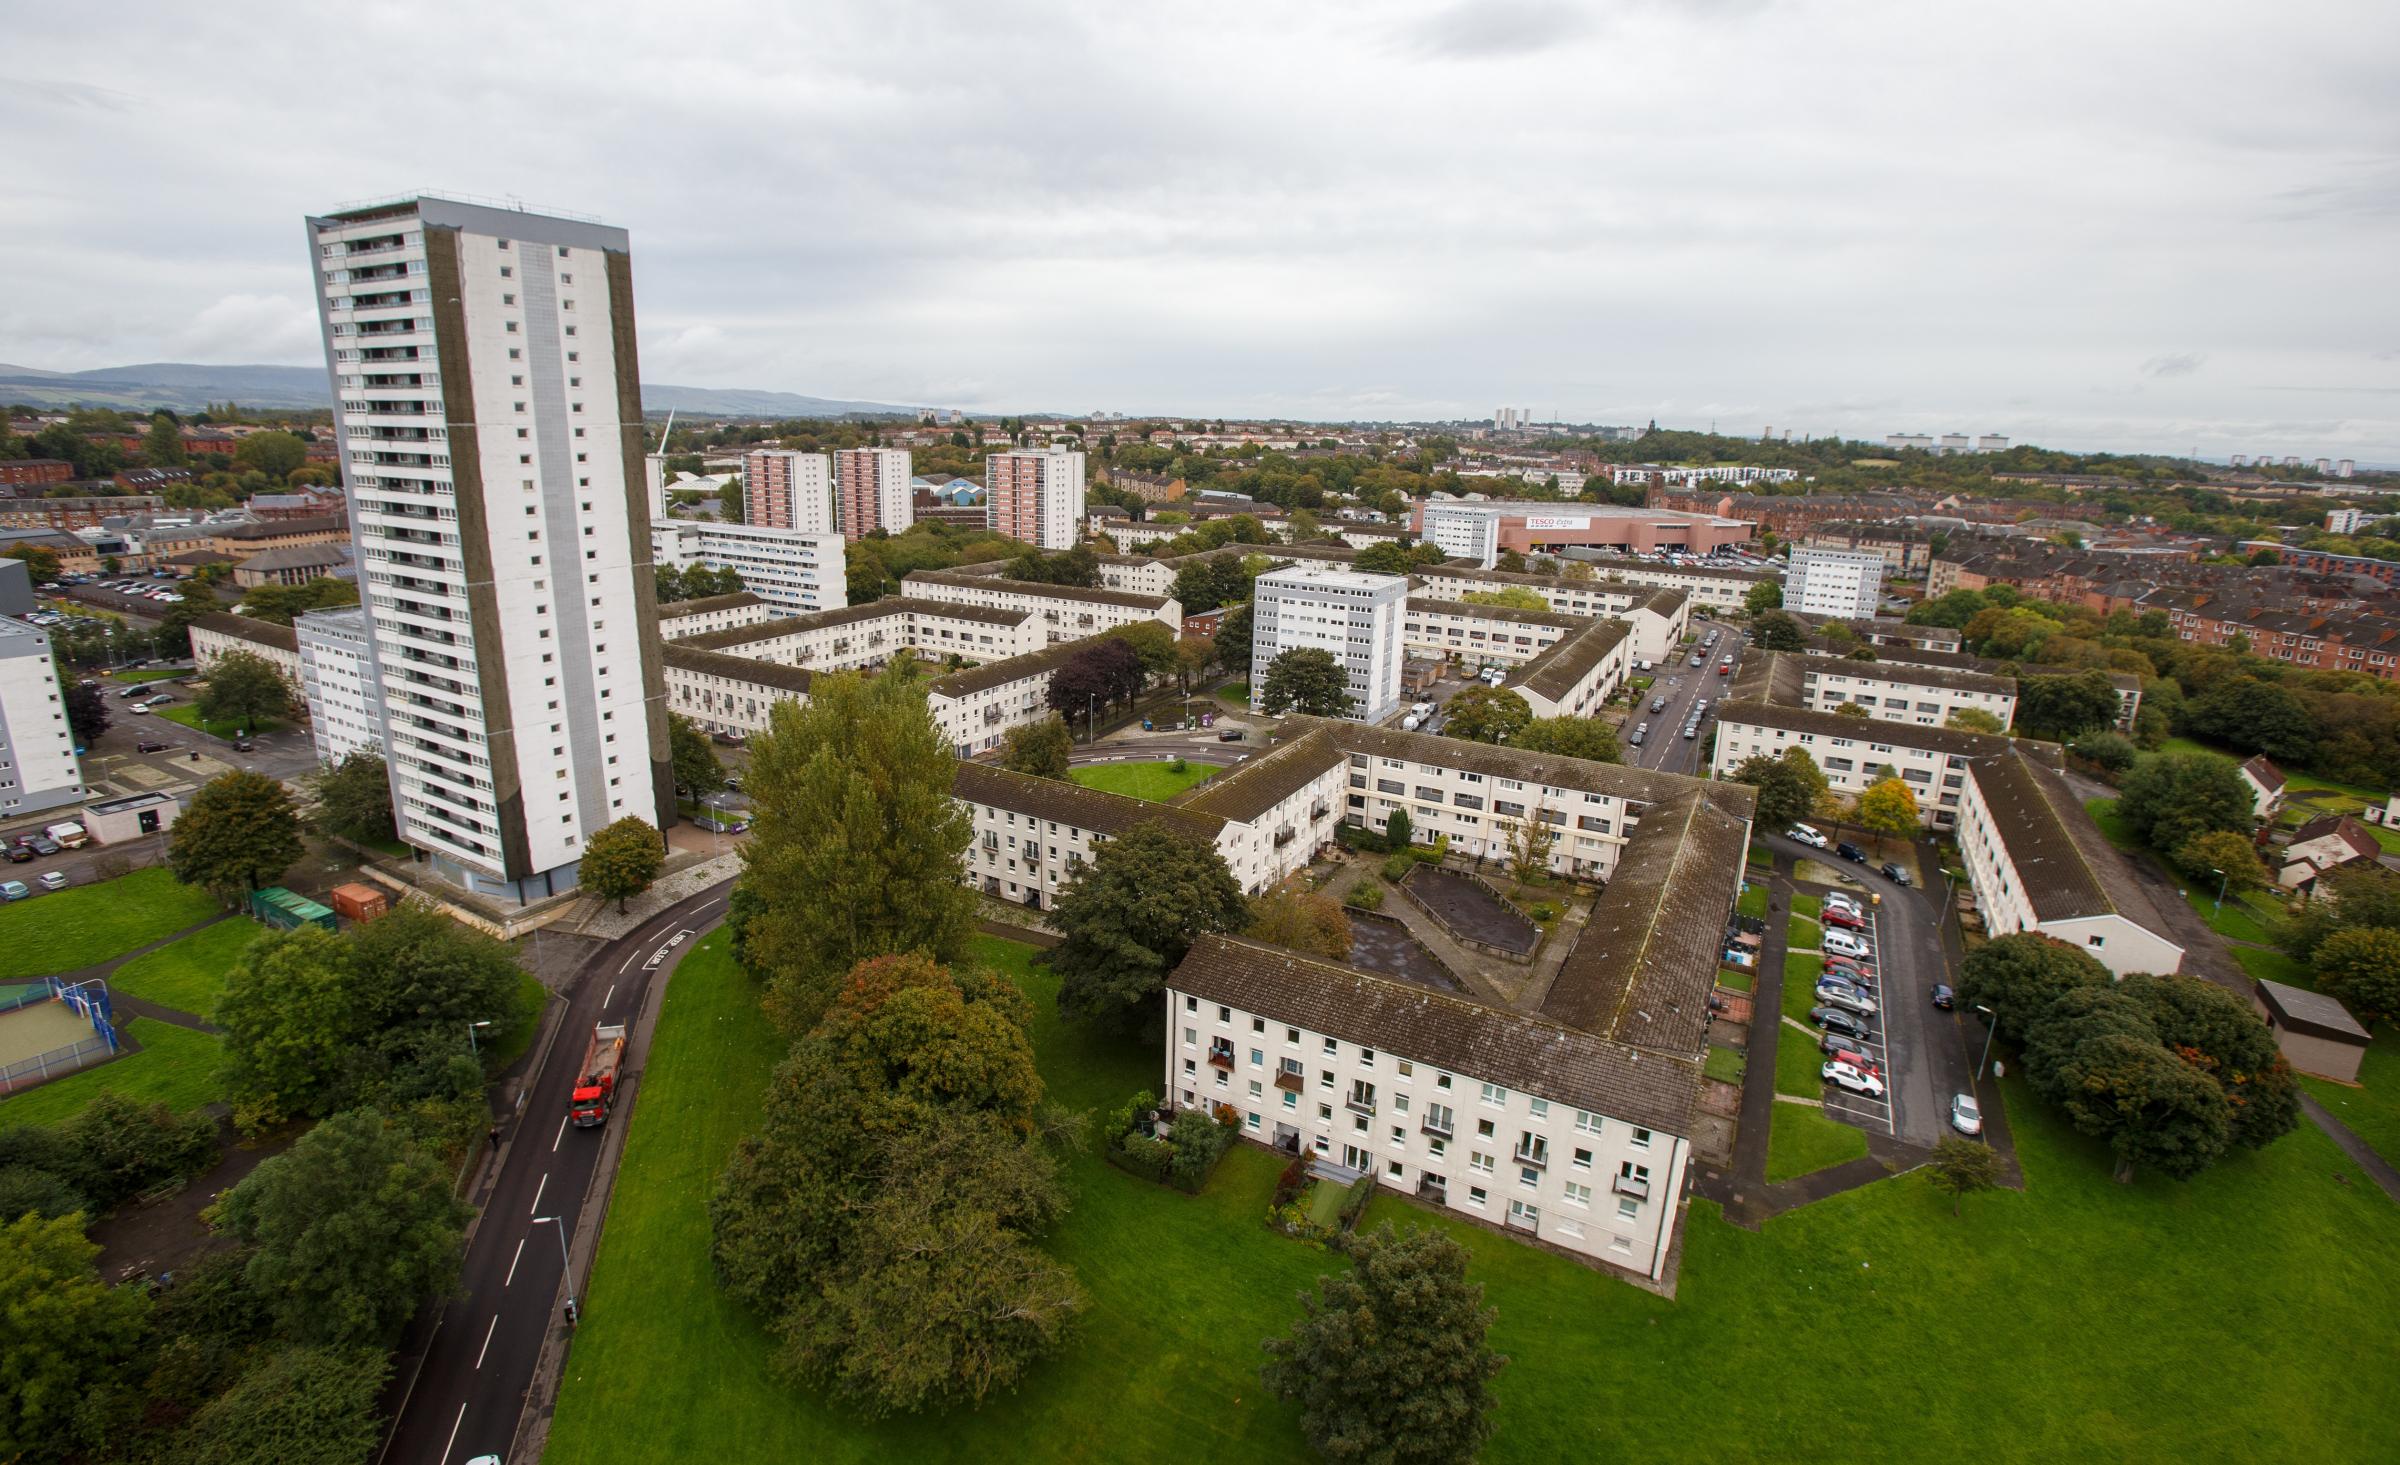 Four tower blocks in The Wyndford, the former site of Maryhill Barracks are earmarked for demolition. Photograph by Colin Mearns.